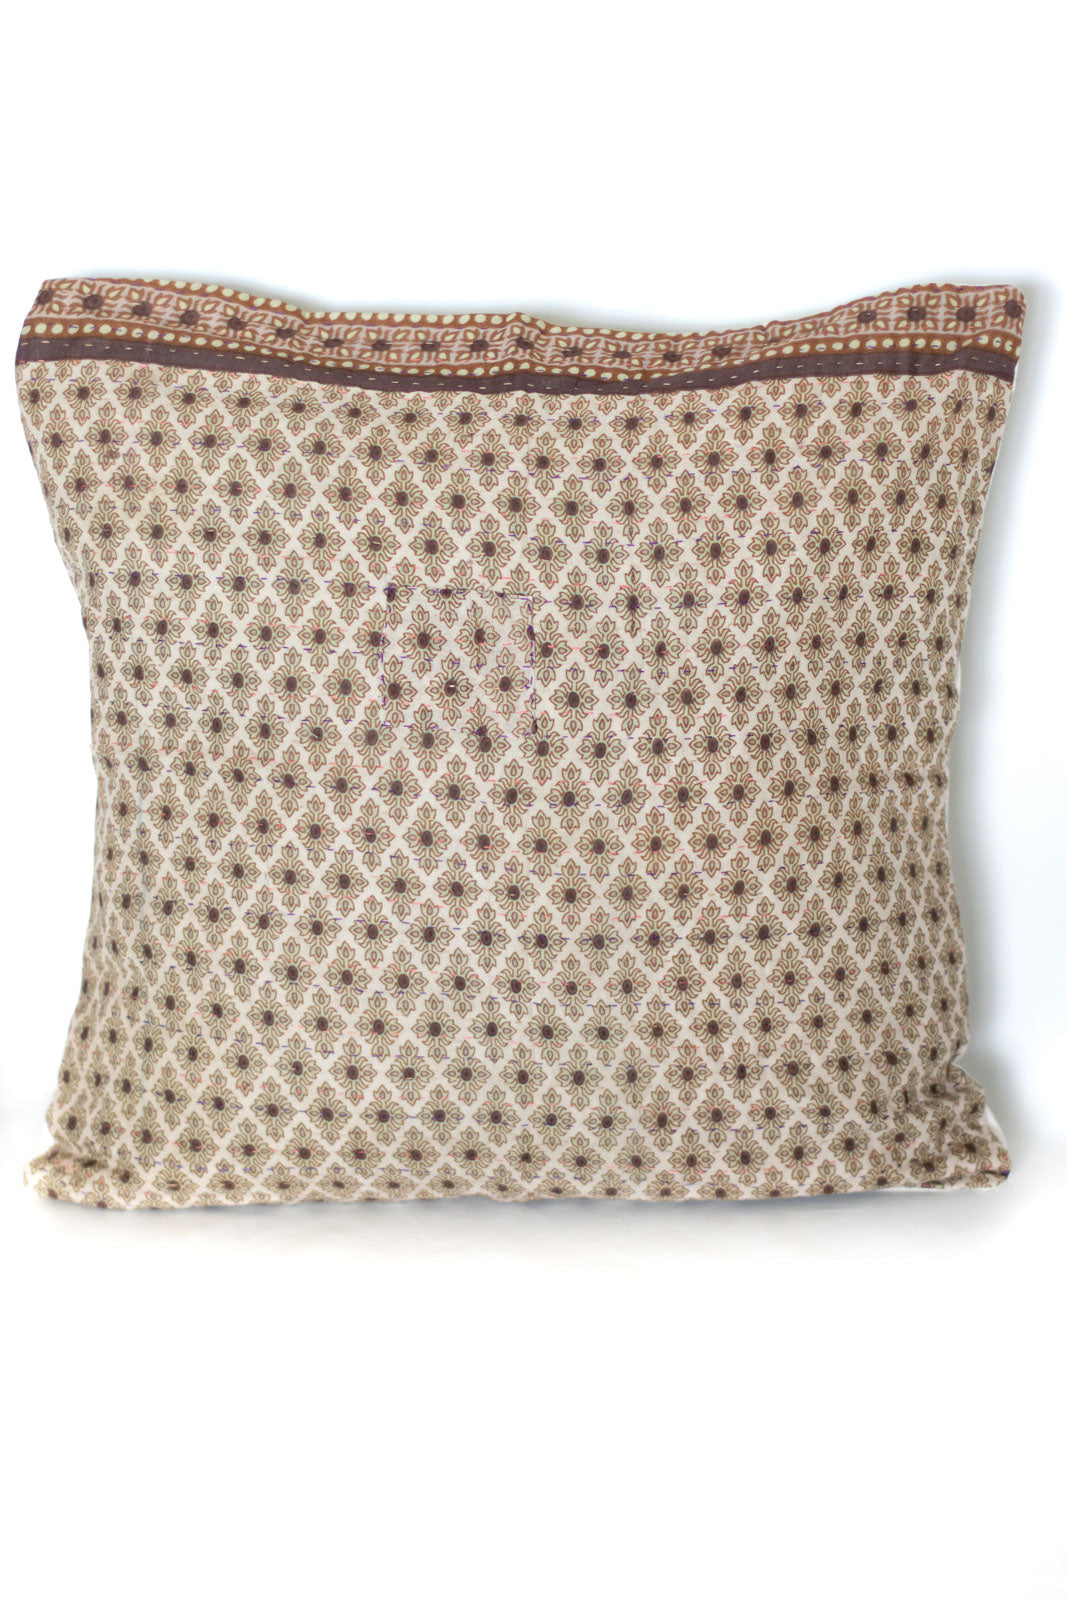 Care no. 8 Kantha Pillow Cover